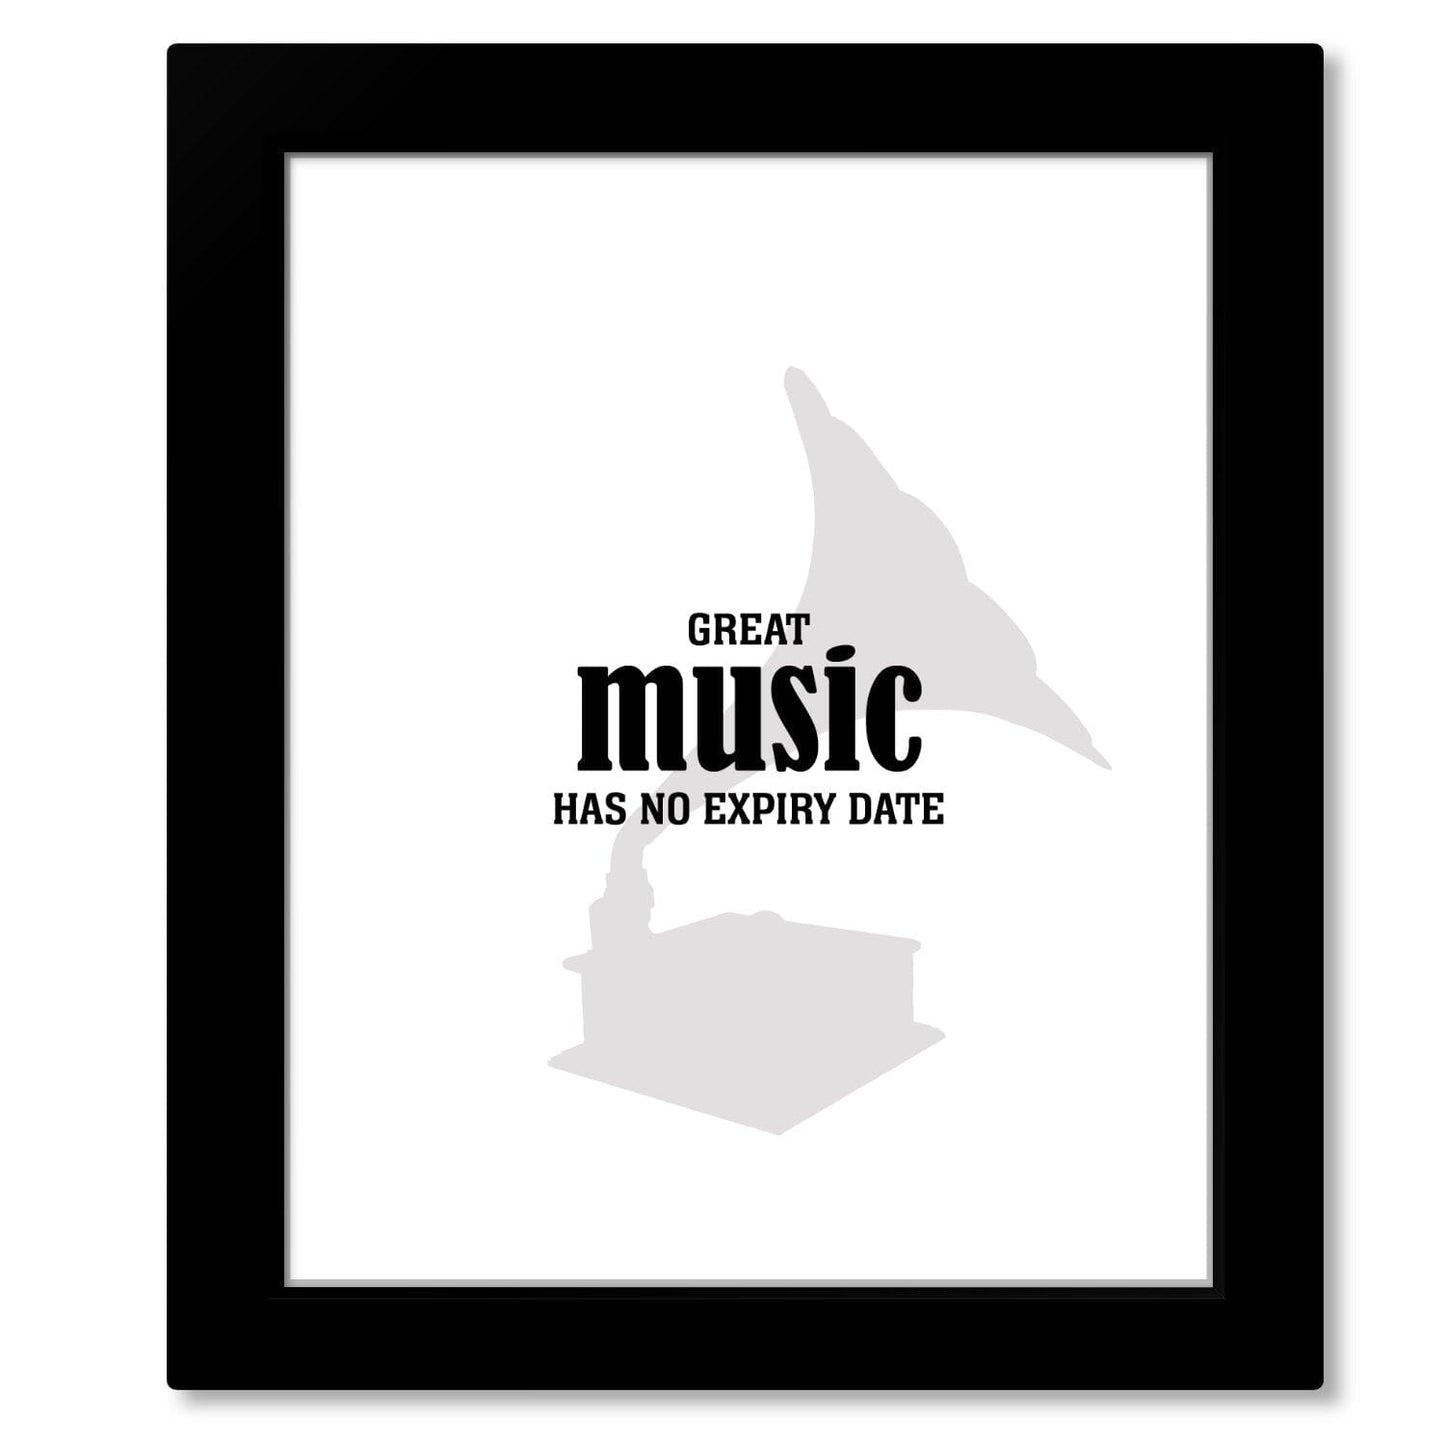 Great Music Has No Expiry Date - Wise and Witty Art Wise and Wiseass Quotes Song Lyrics Art 8x10 Framed Print 